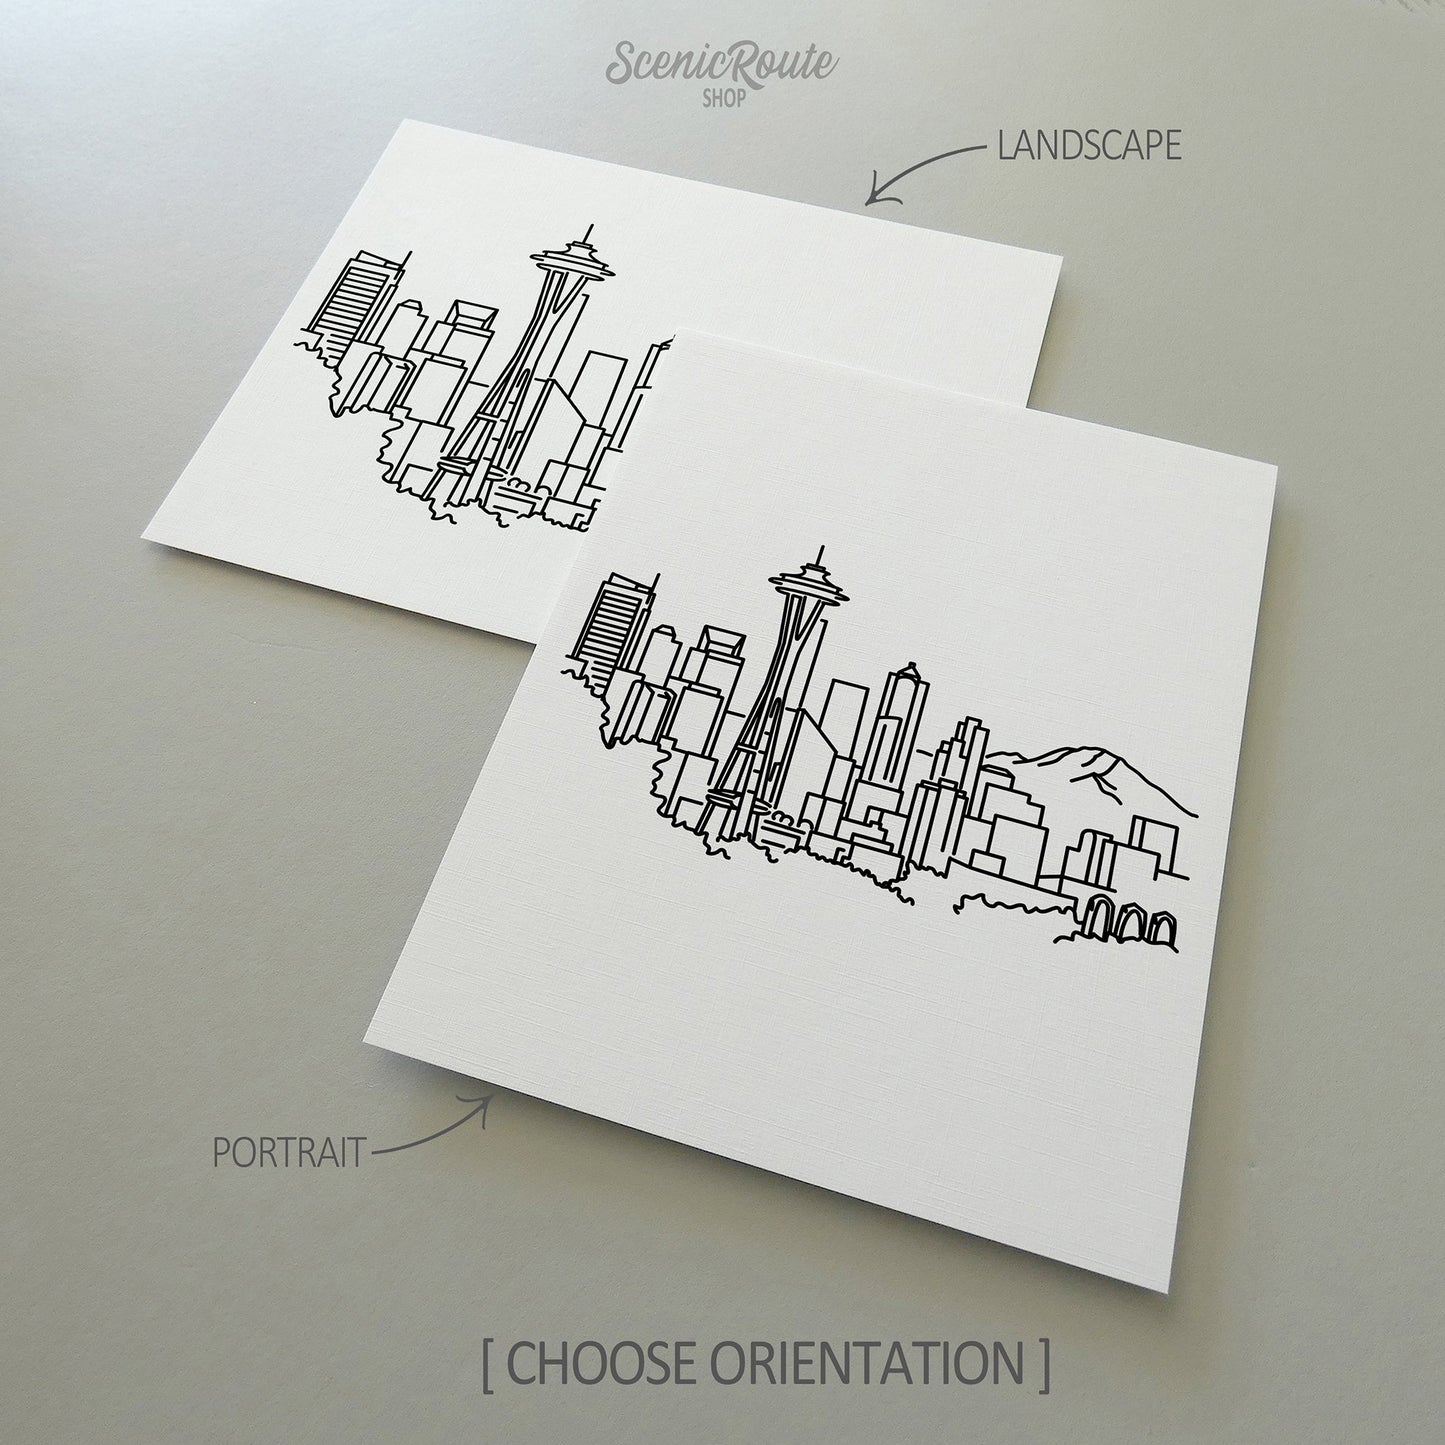 Two line art drawings of the Seattle Skyline on white linen paper with a gray background.  The pieces are shown in portrait and landscape orientation for the available art print options.